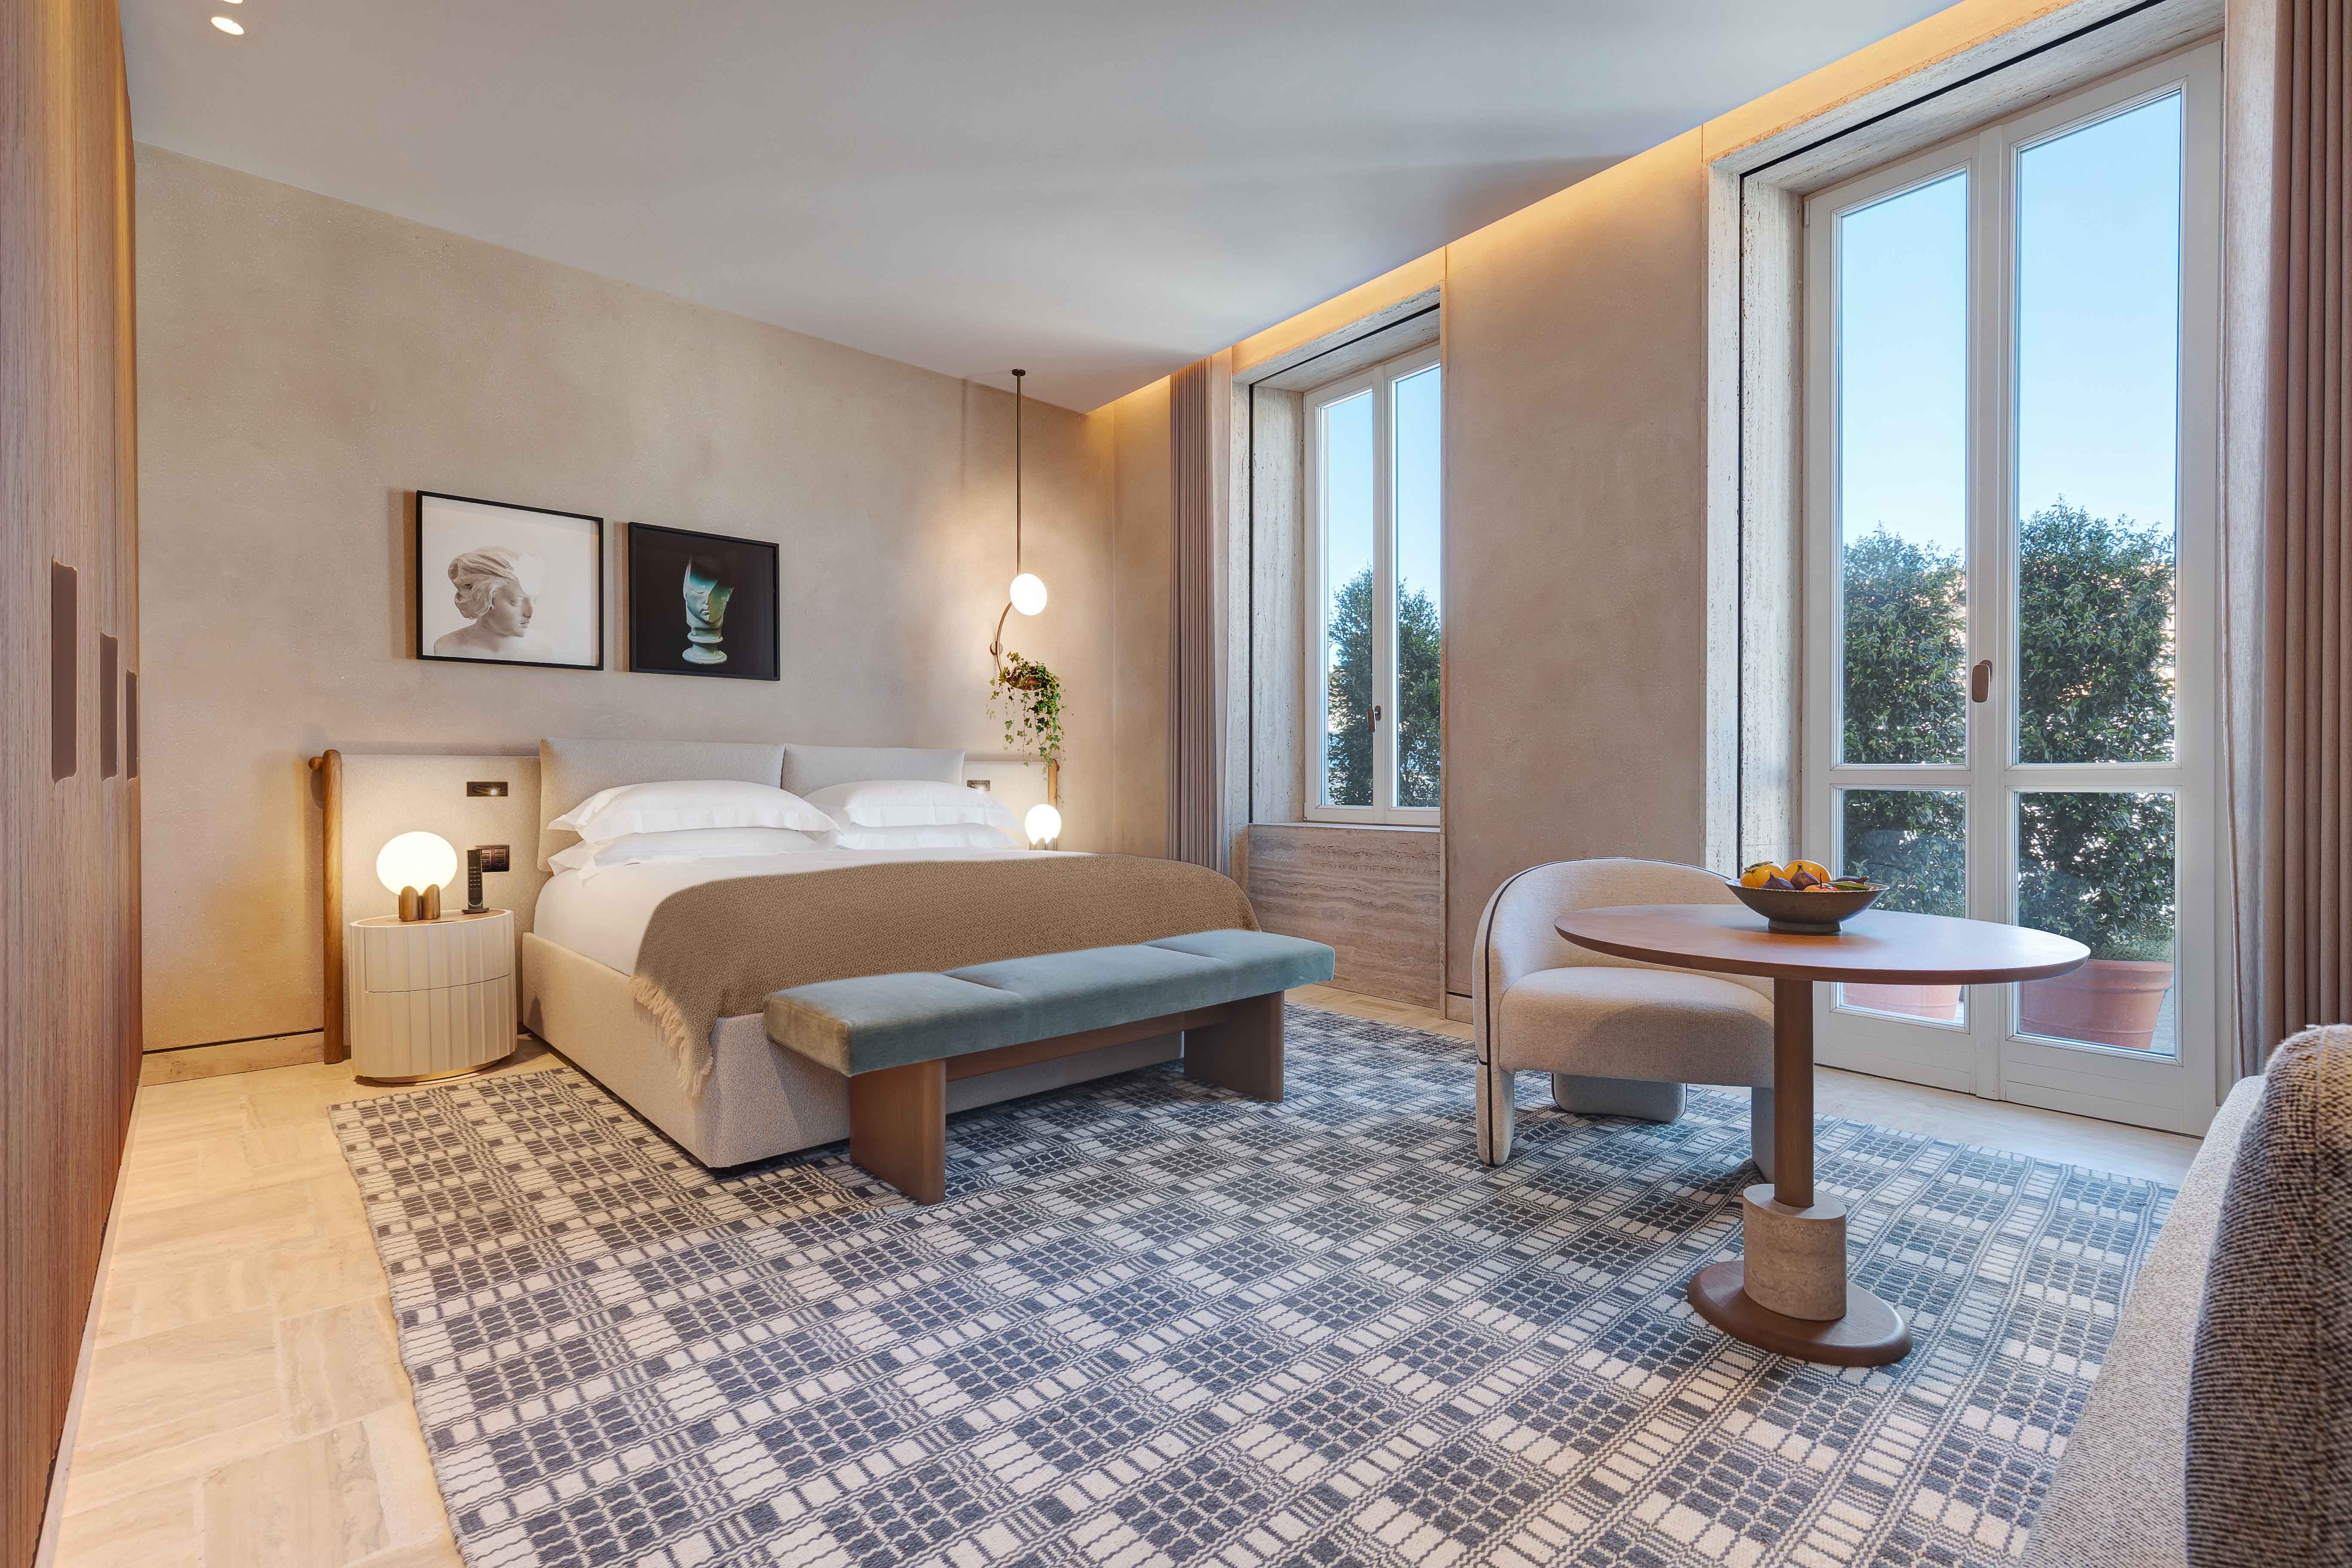 The opening of Six Senses Rome marks the debut of the brand''''s inaugural urban hotel in Italy.